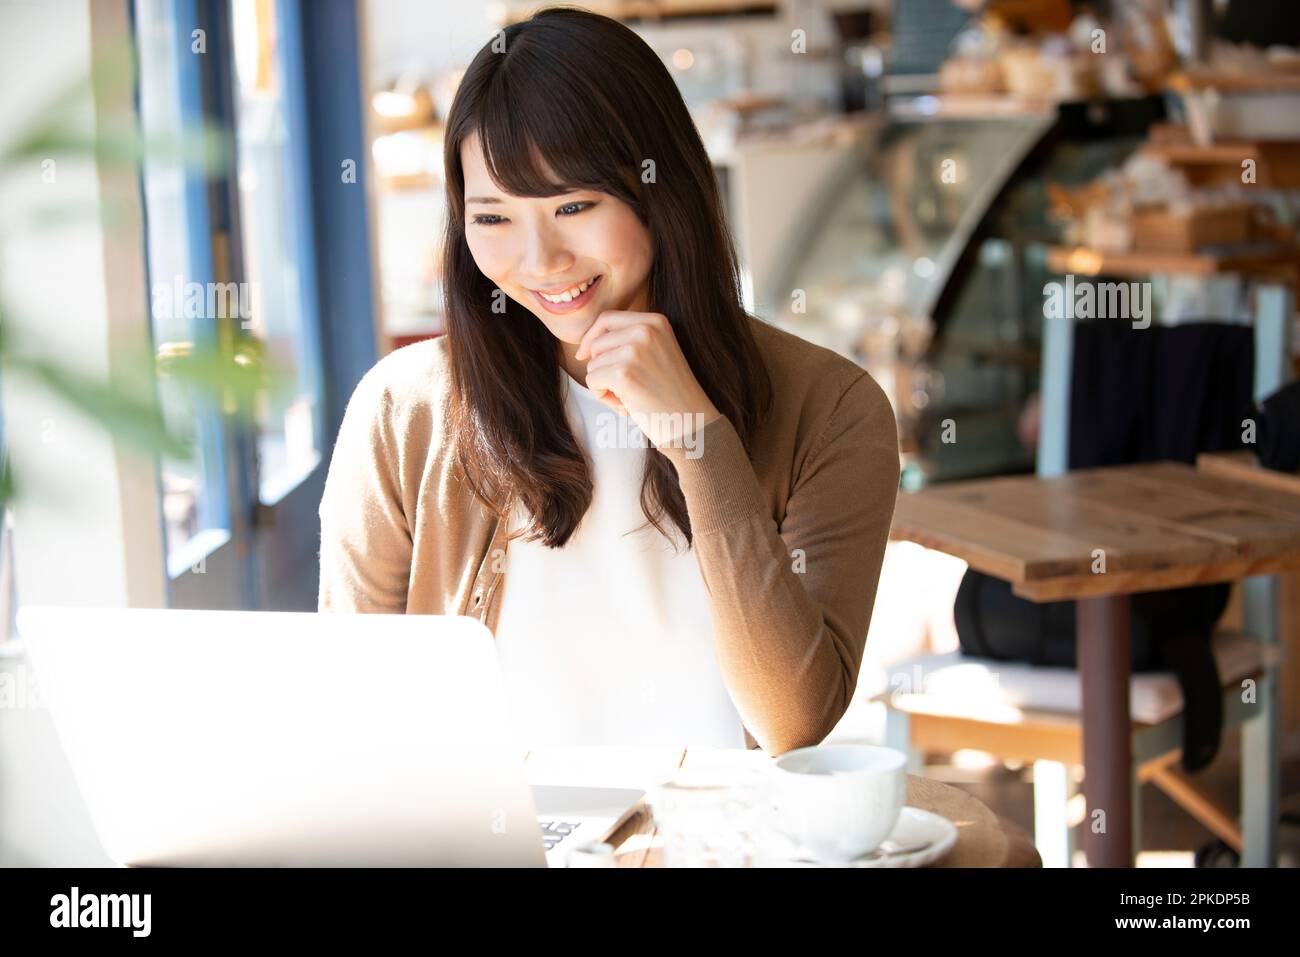 Woman working at a café using a computer Stock Photo